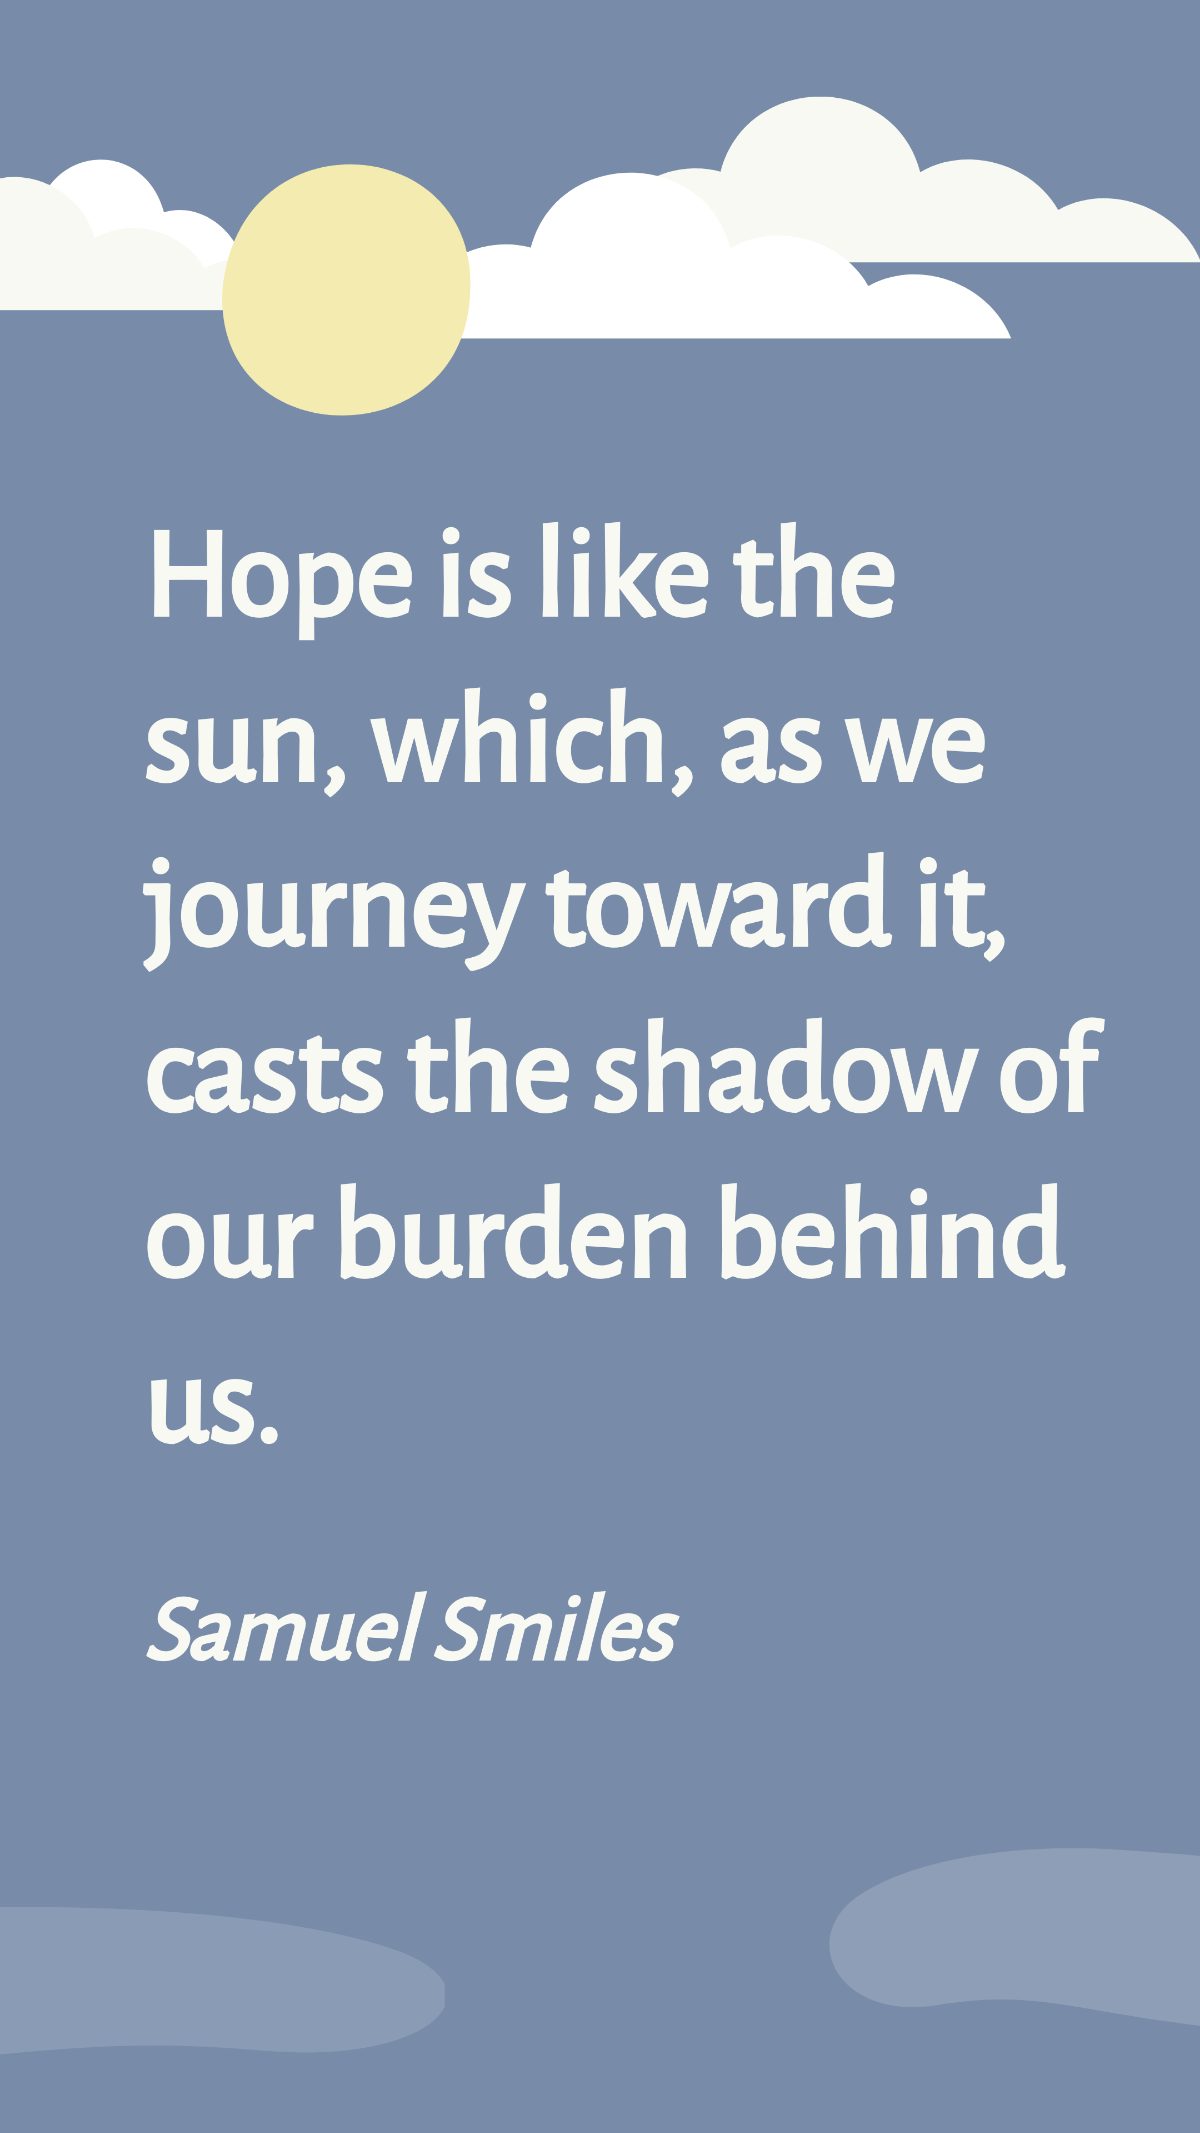 Samuel Smiles -Hope is like the sun, which, as we journey toward it, casts the shadow of our burden behind us. Template